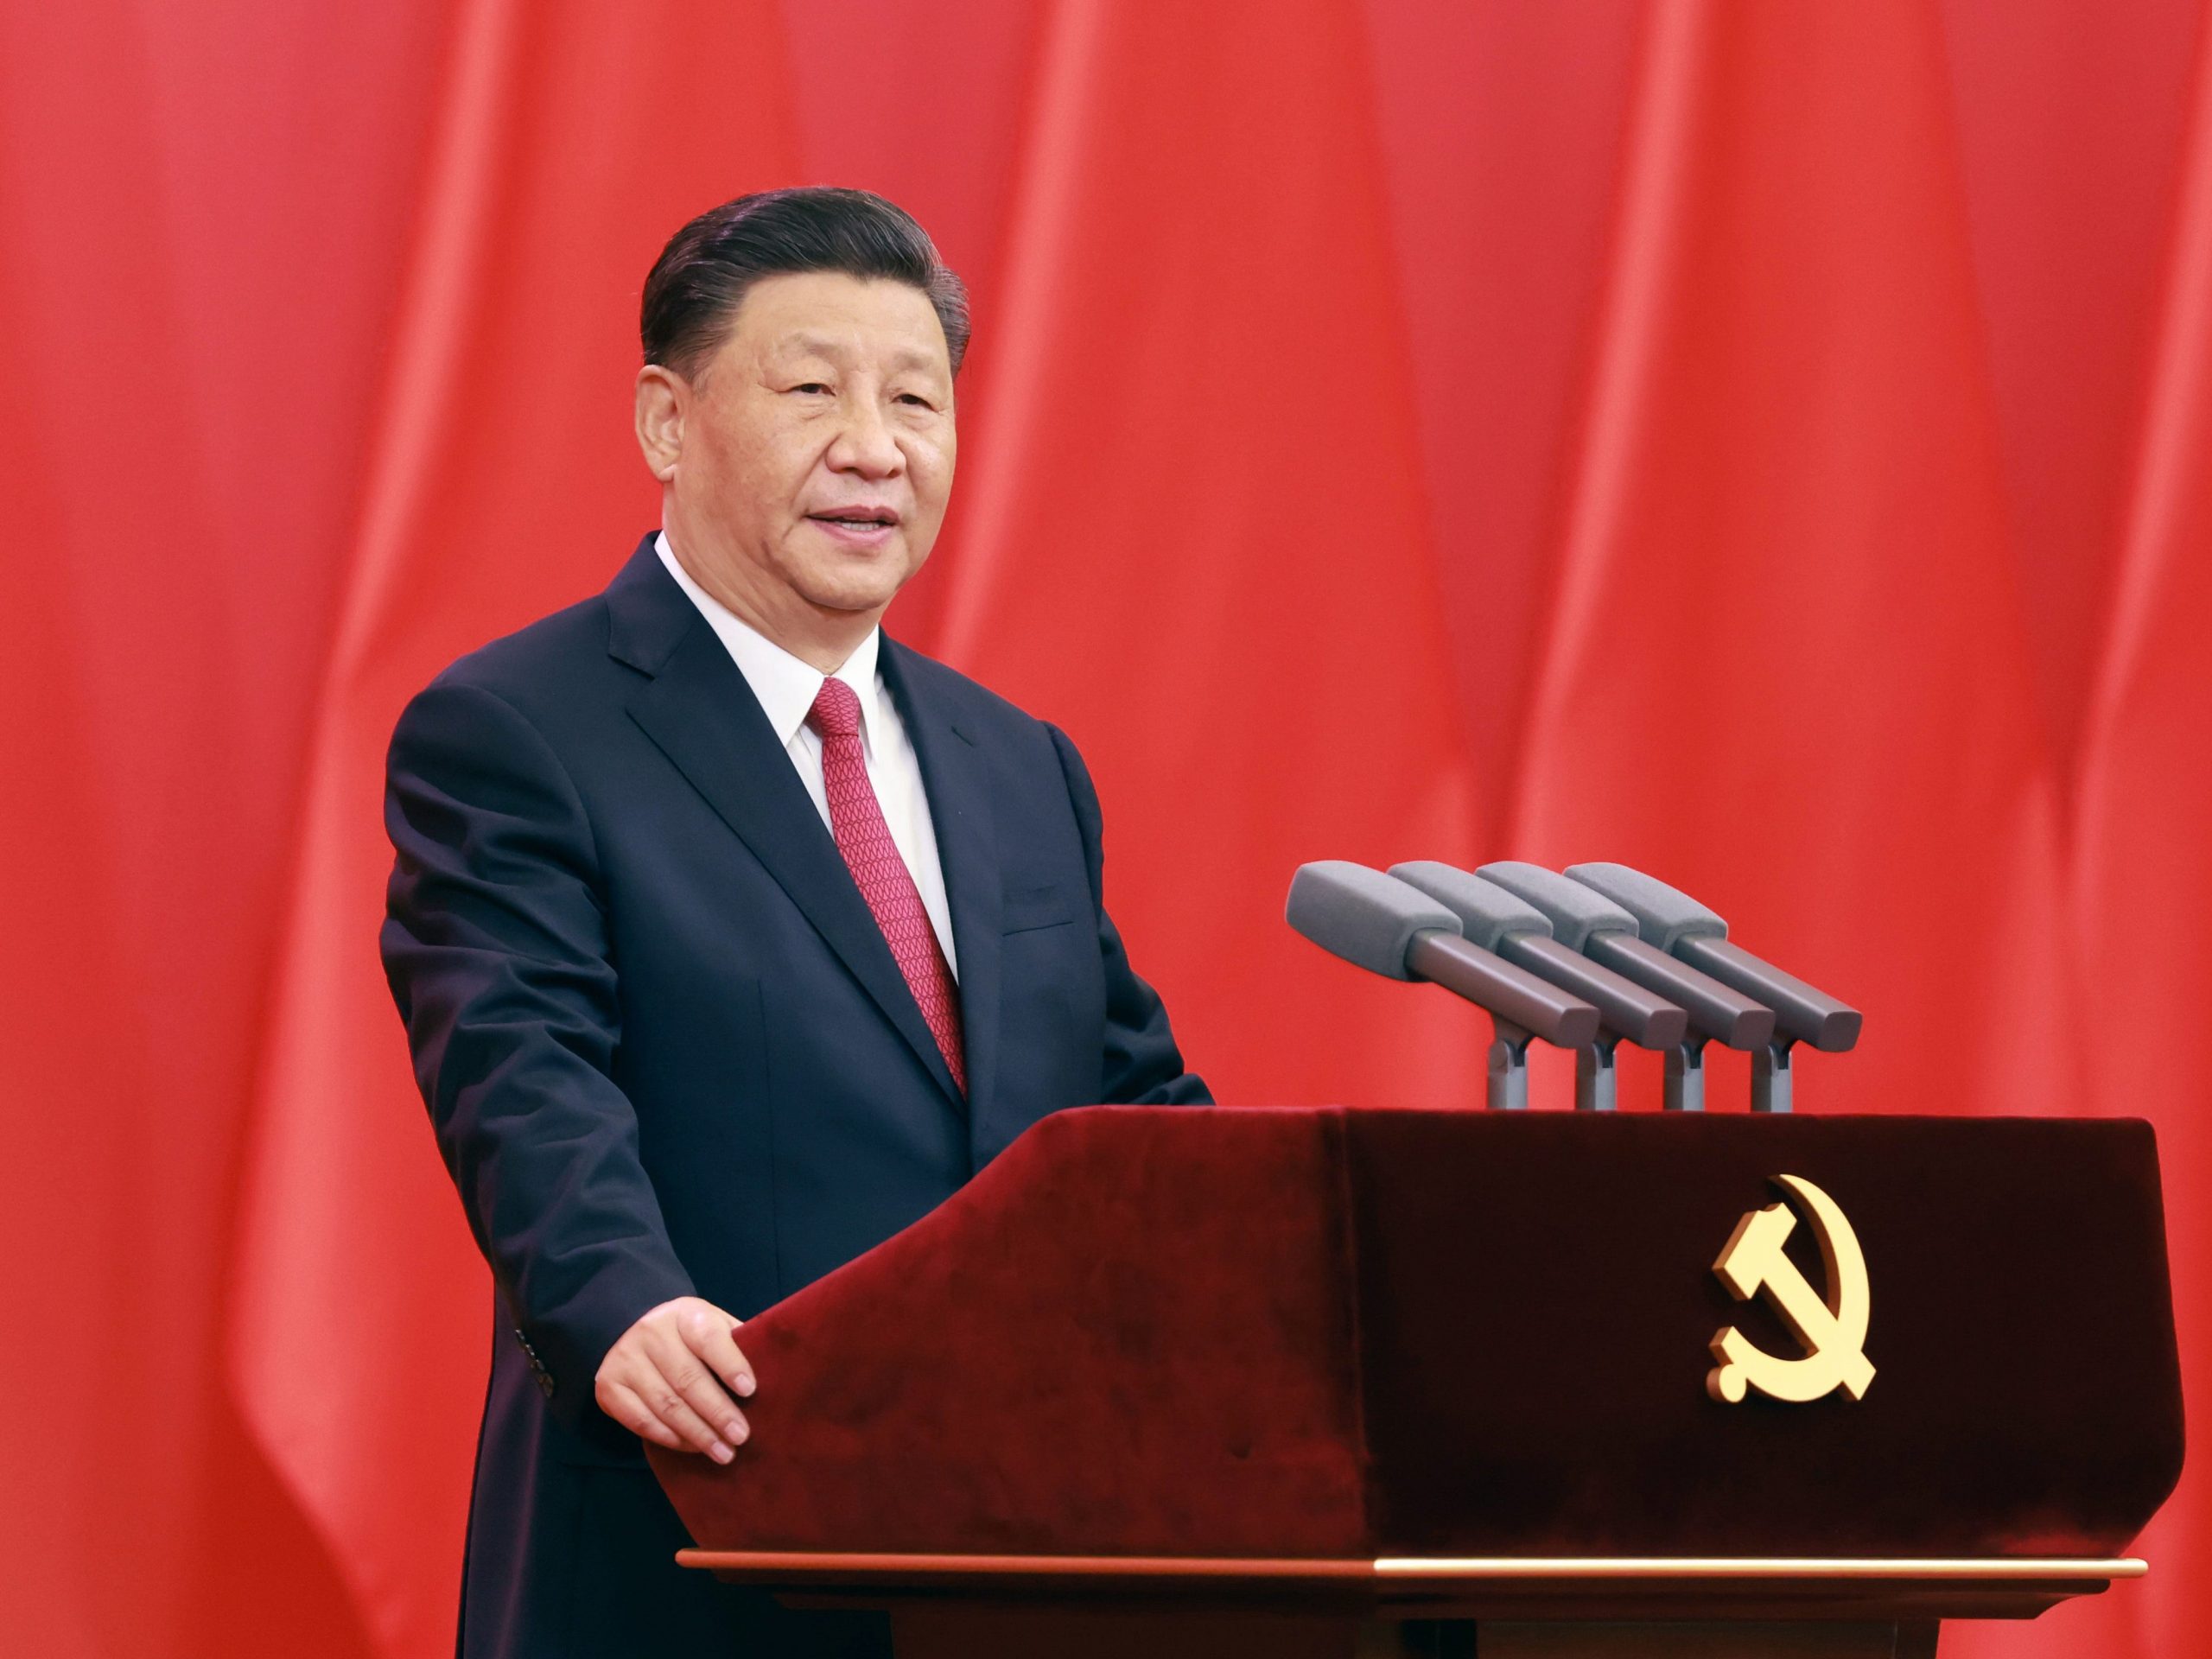 Chinese President Xi Jinping delivers a speech at the ceremony to present the July 1 Medal, the Party's highest honor, to outstanding Party members at the Great Hall of the People in Beijing, China, June 29, 2021.